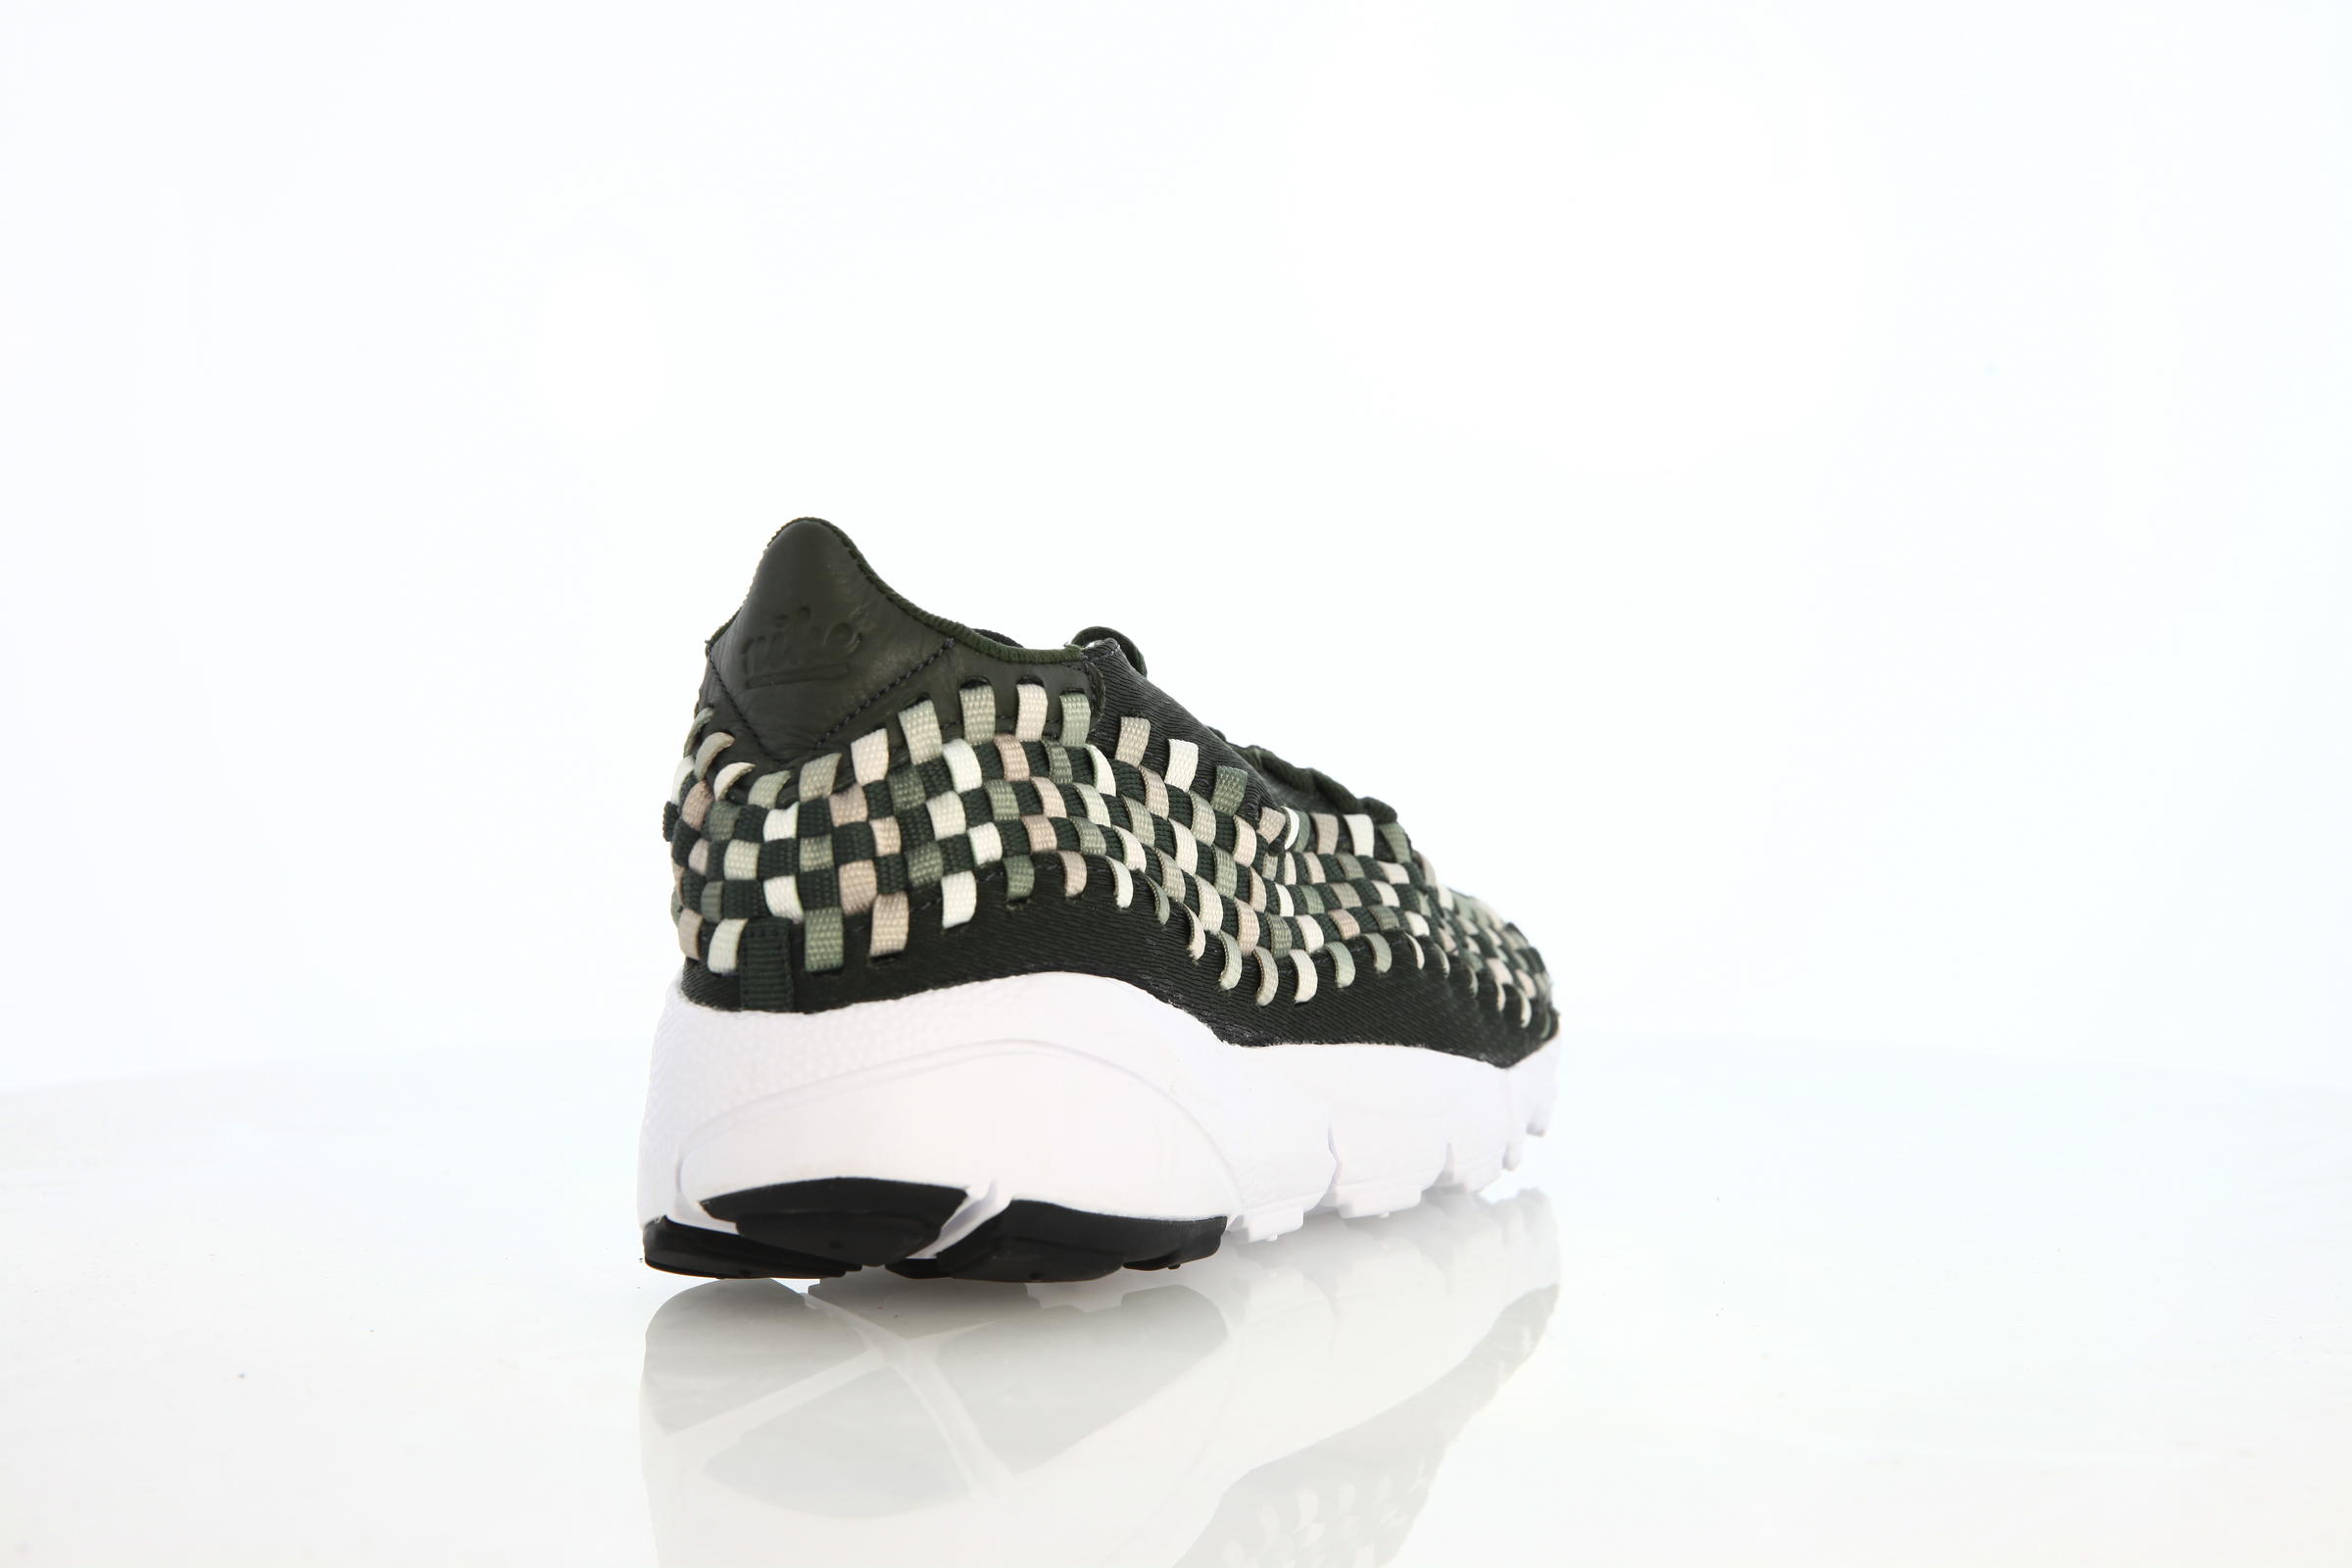 Nike Air Footscape Woven Nm "Sequoia"